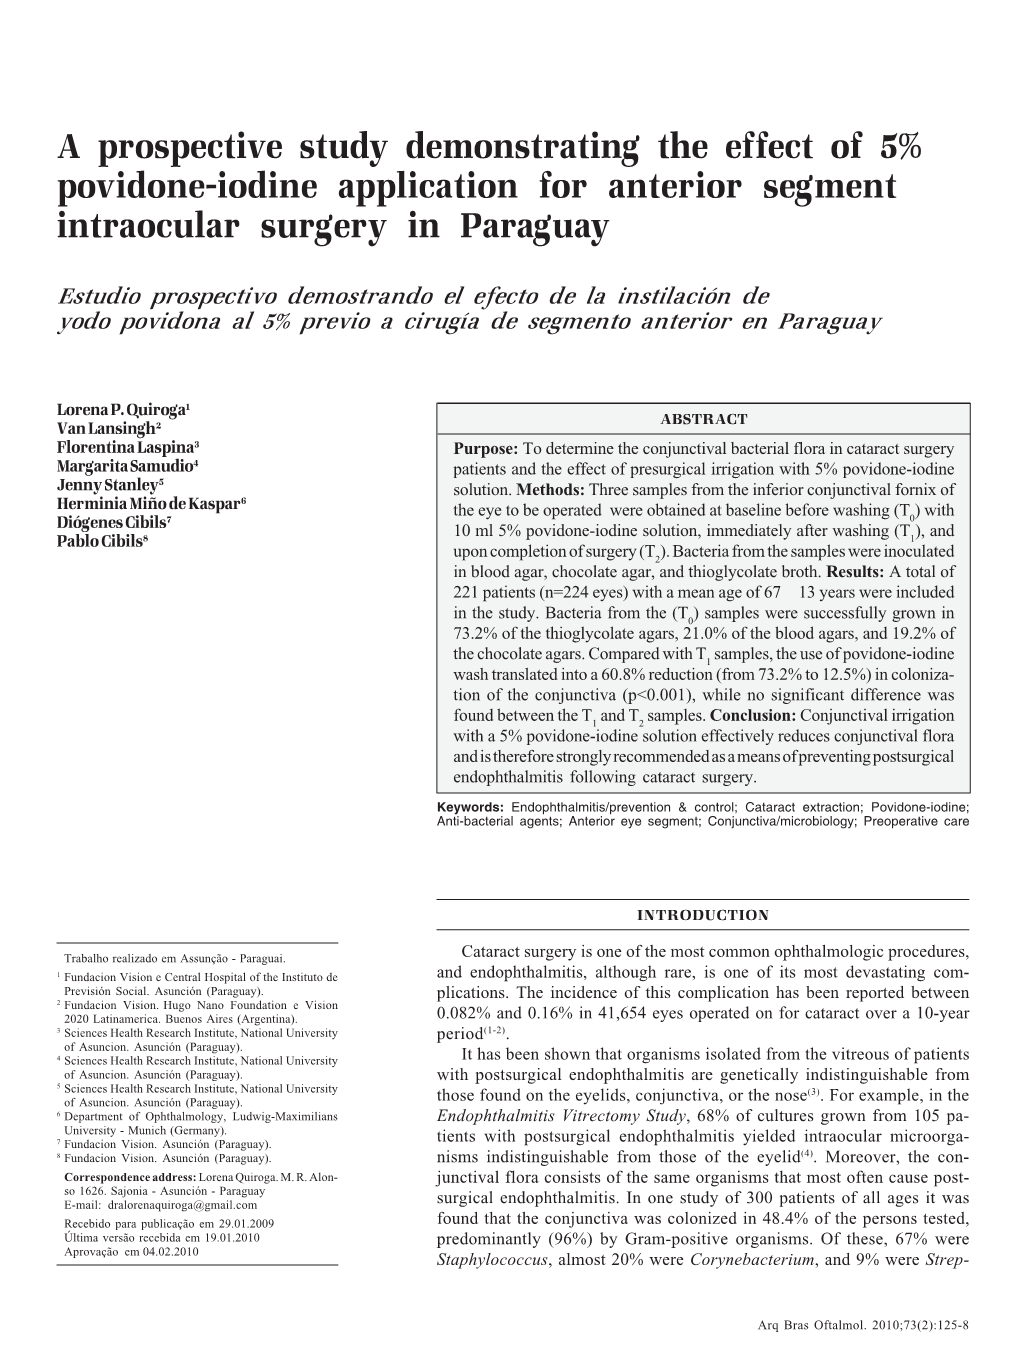 A Prospective Study Demonstrating the Effect of 5% Povidone-Iodine Application for Anterior Segment Intraocular Surgery in Paraguay